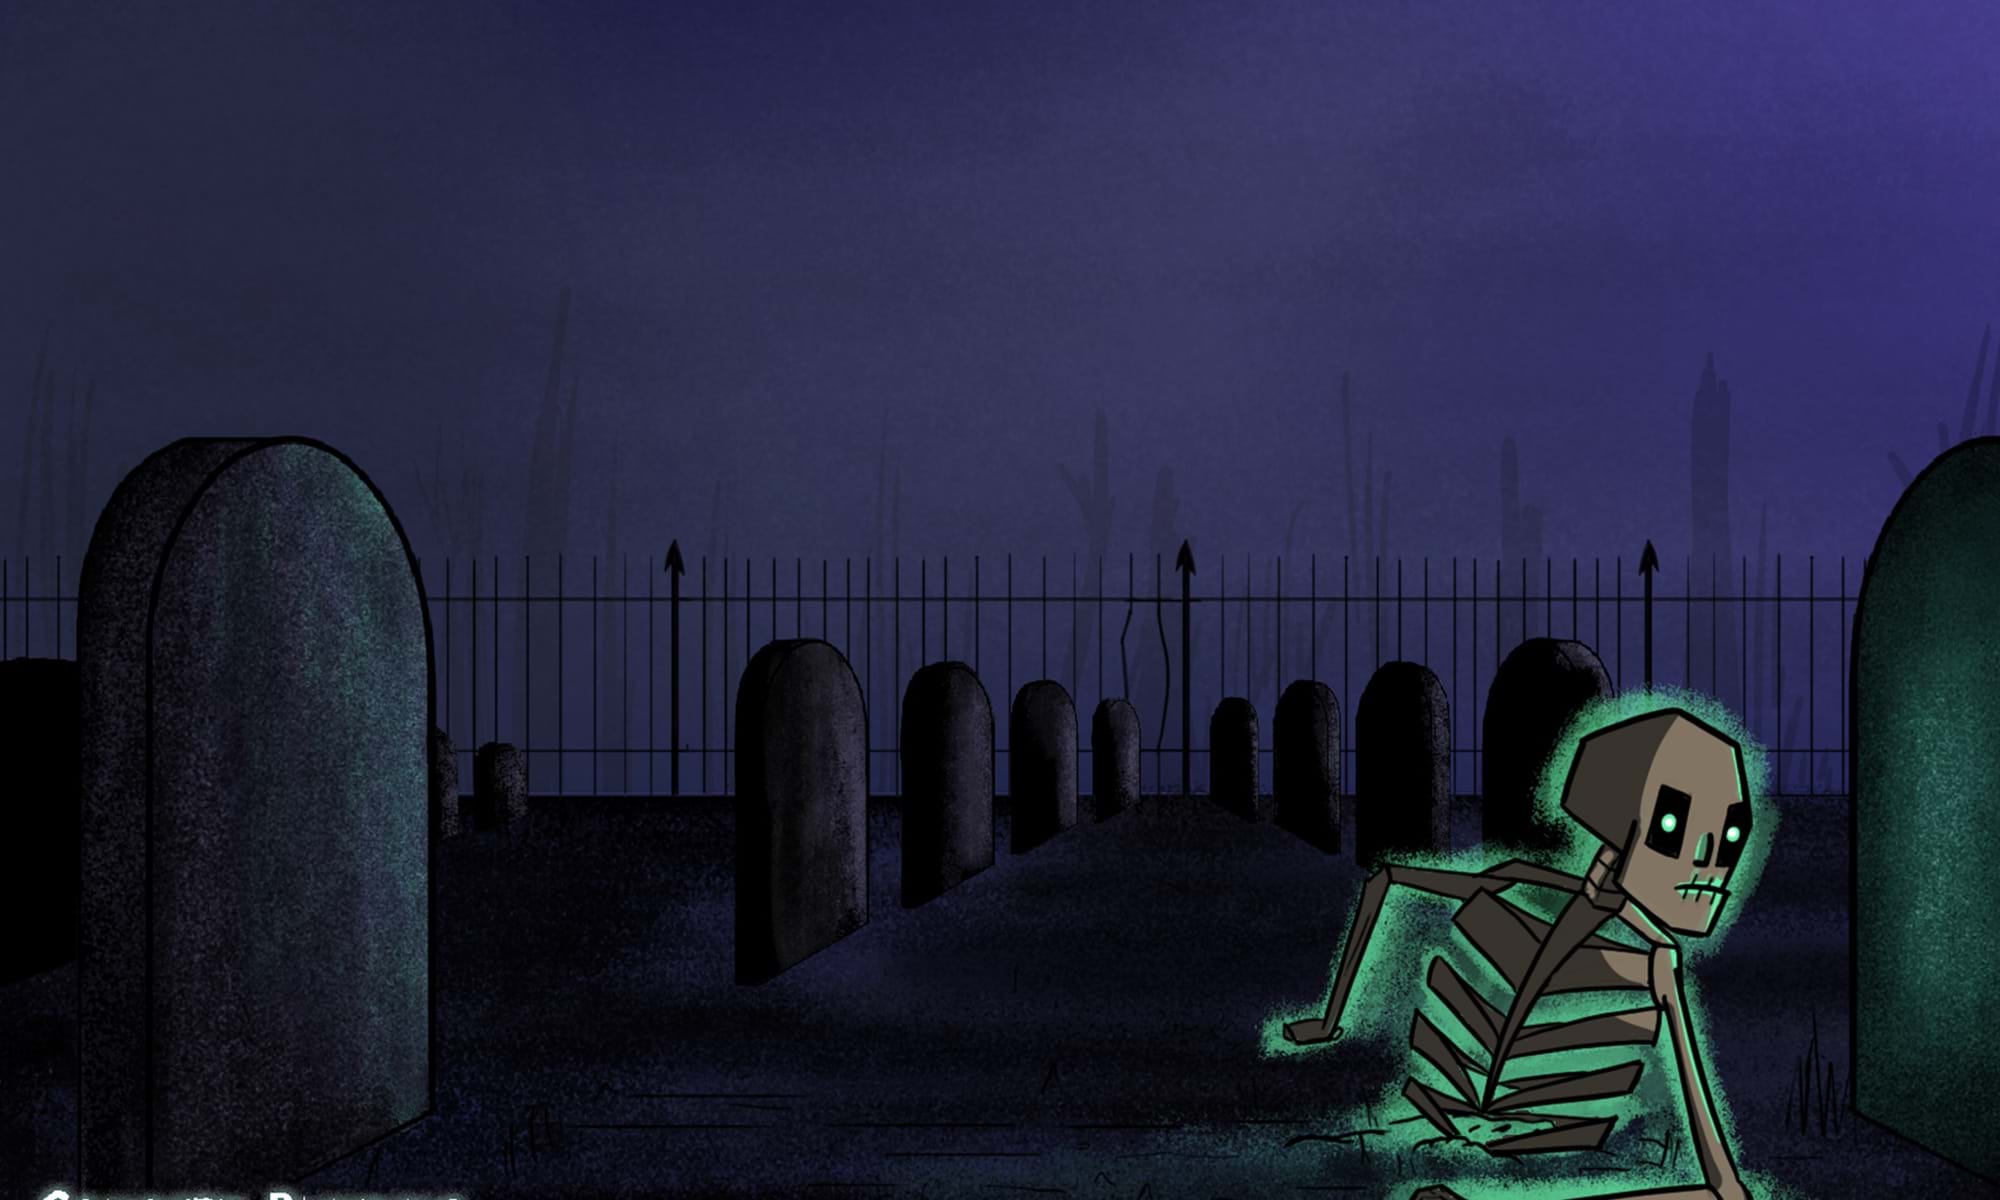 “Animated Horror Scene for a Family Audience” is a 2021 Digital Graduate Show project by Conor Barber, a Computer Arts student at Abertay University.